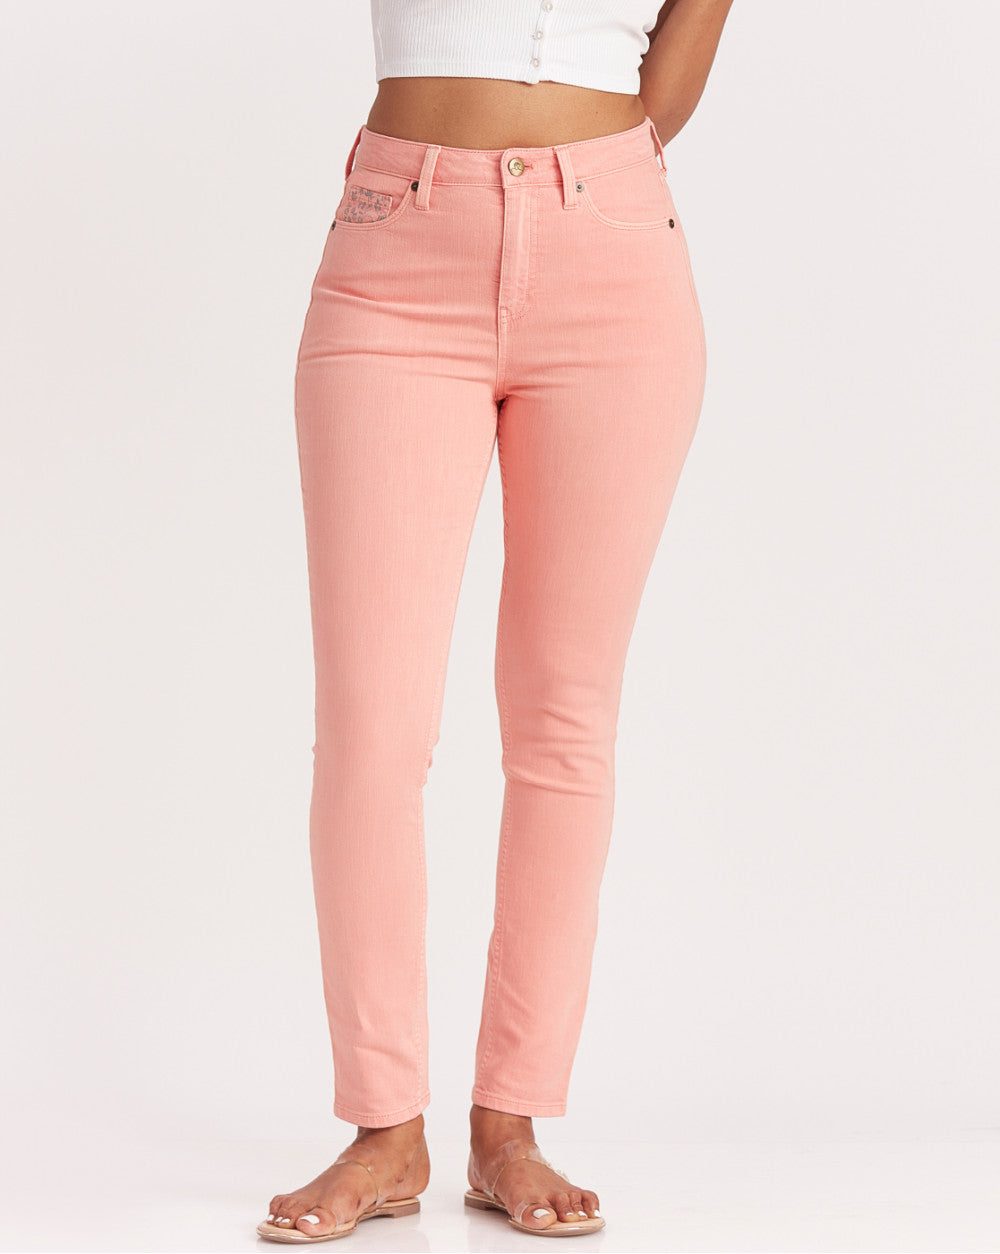 Skinny Fit High Waist Colored Jeans - Coral